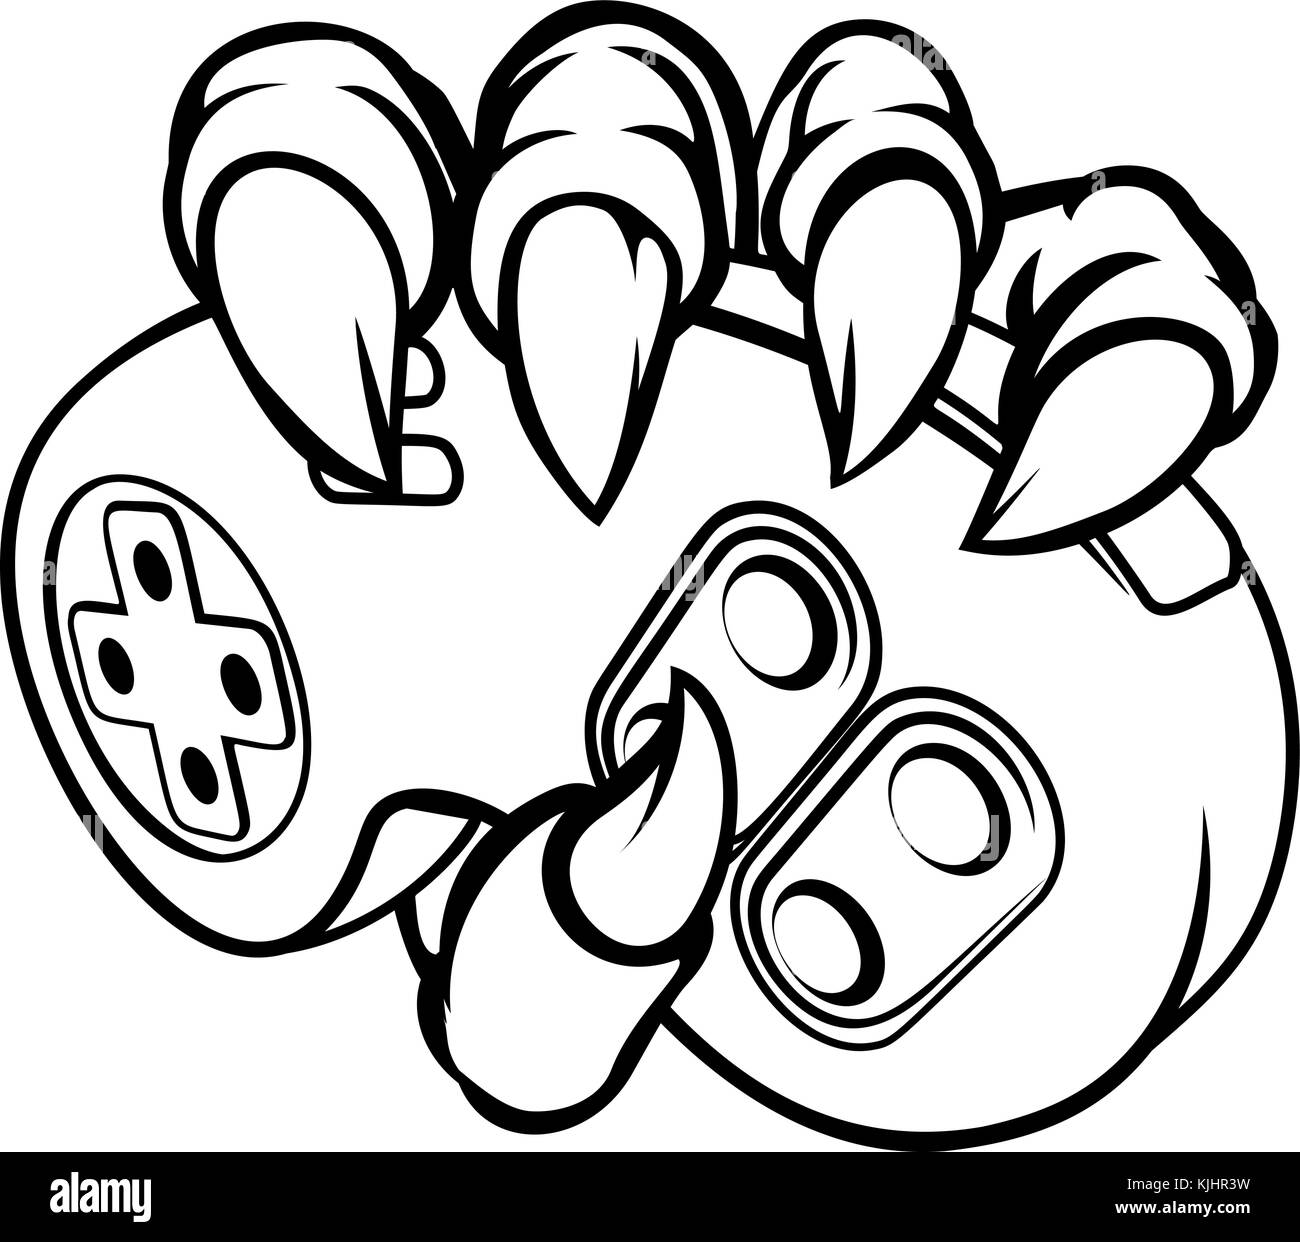 Monster o Animal Claws Holding Games Controller Illustrazione Vettoriale